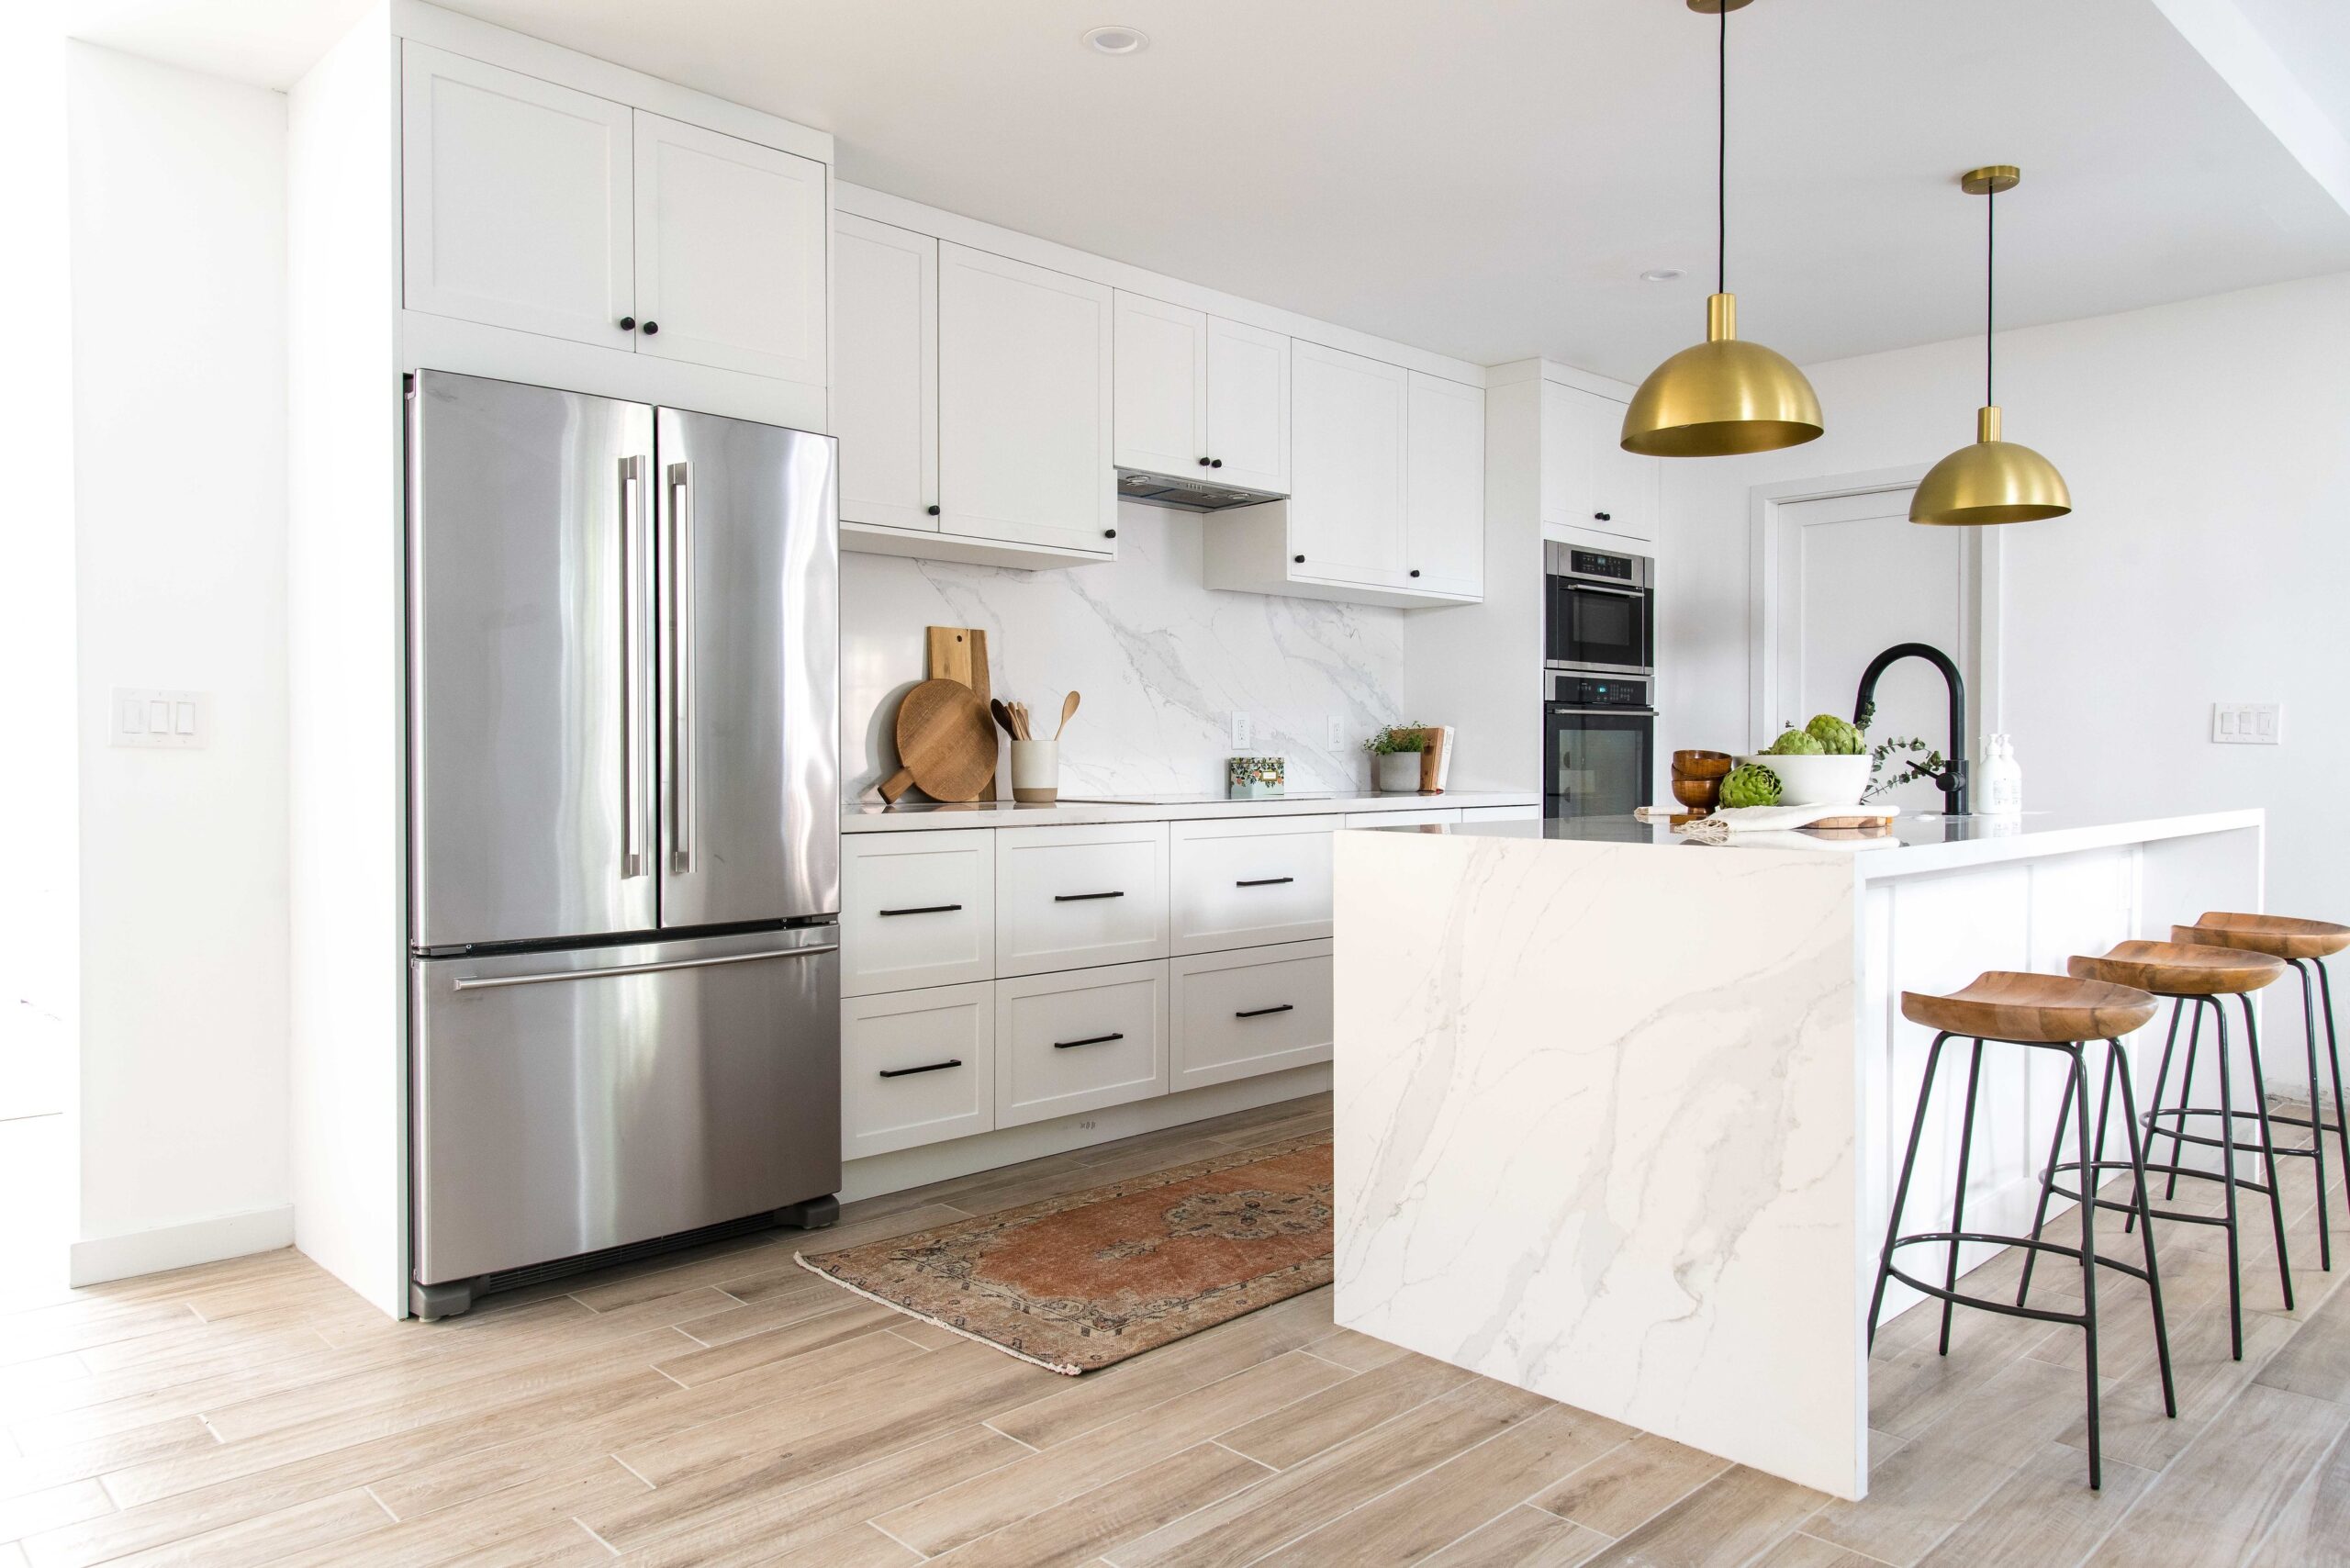 White kitchen cabinets with gold pendants